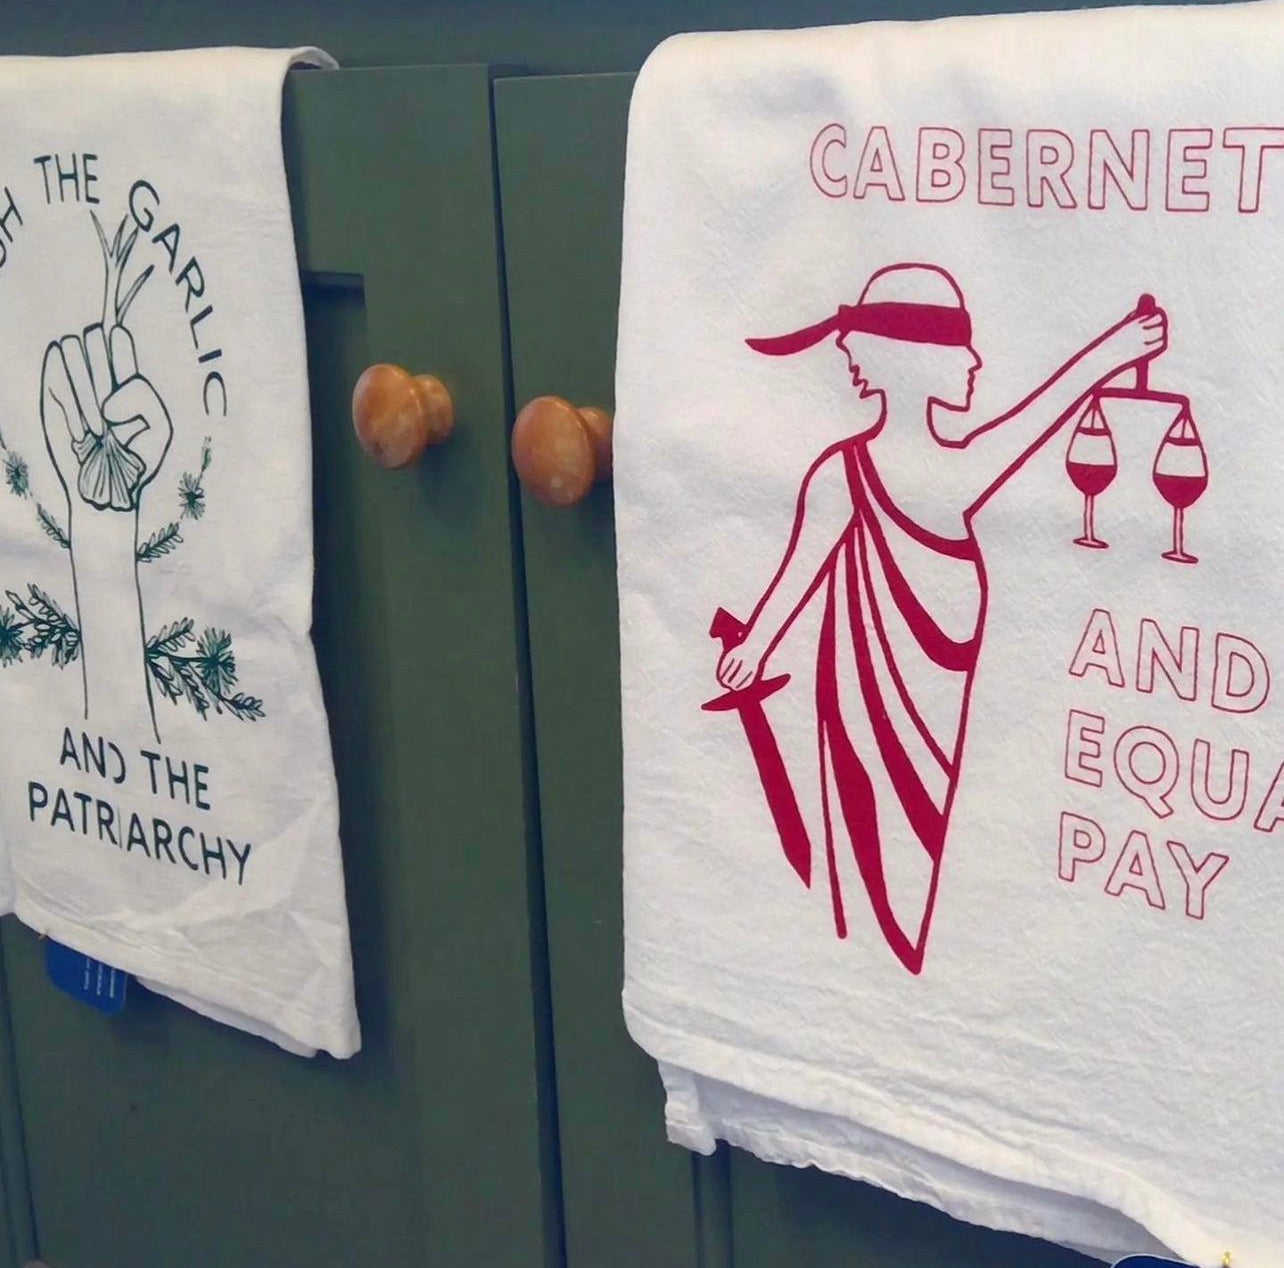 Two tea towels hanging in a kitchen